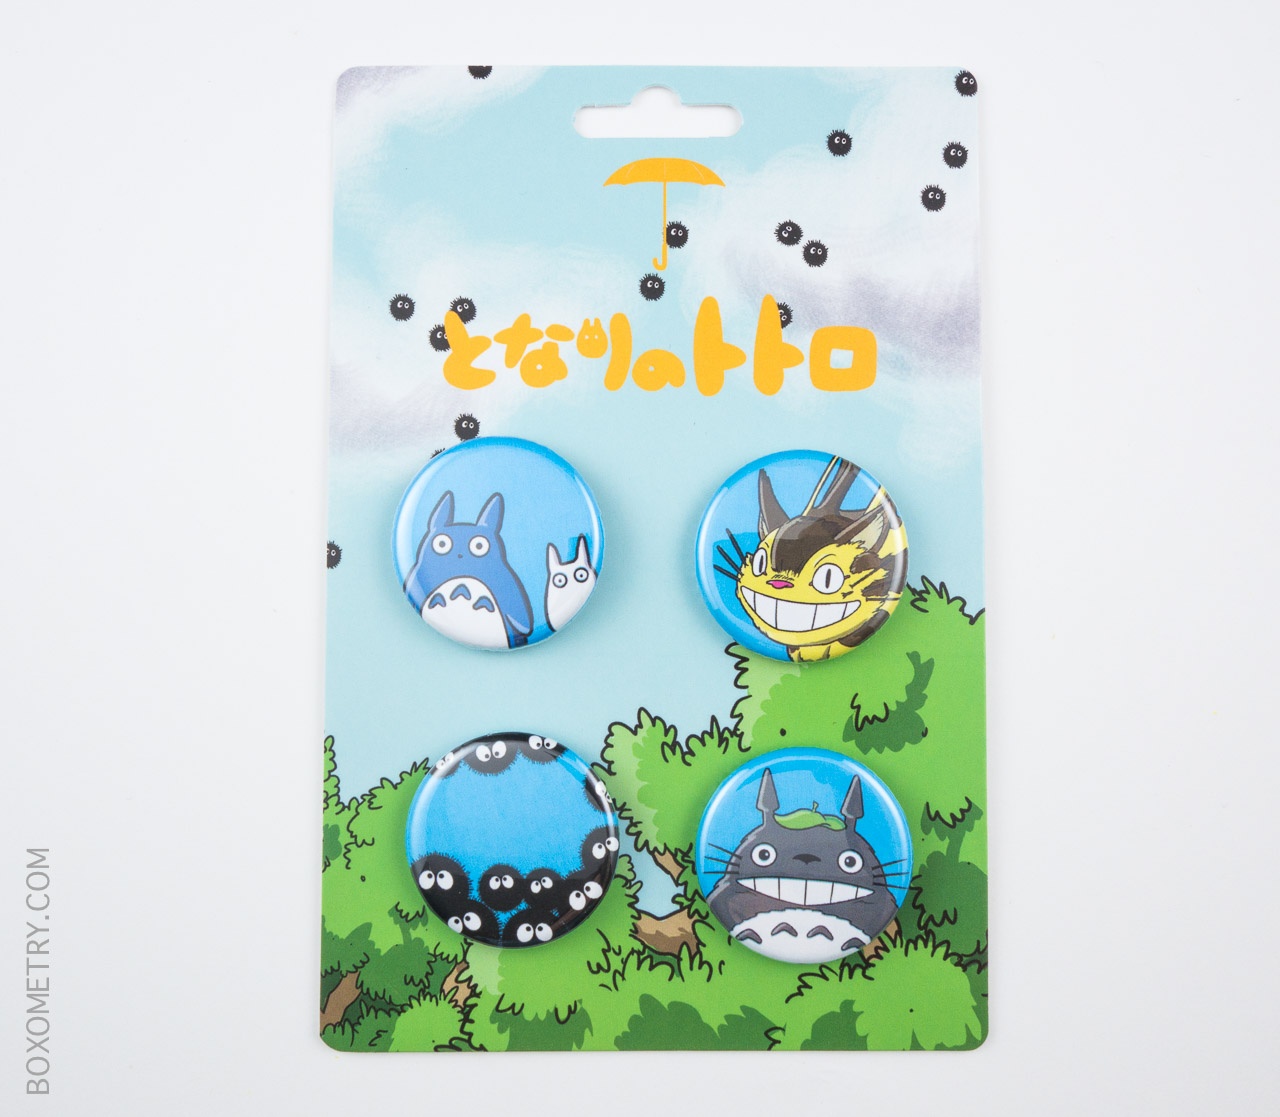 Boxometry Nerd Block May 2015 Review - Exclusive My Neighbor Totoro Set of 4 Pins